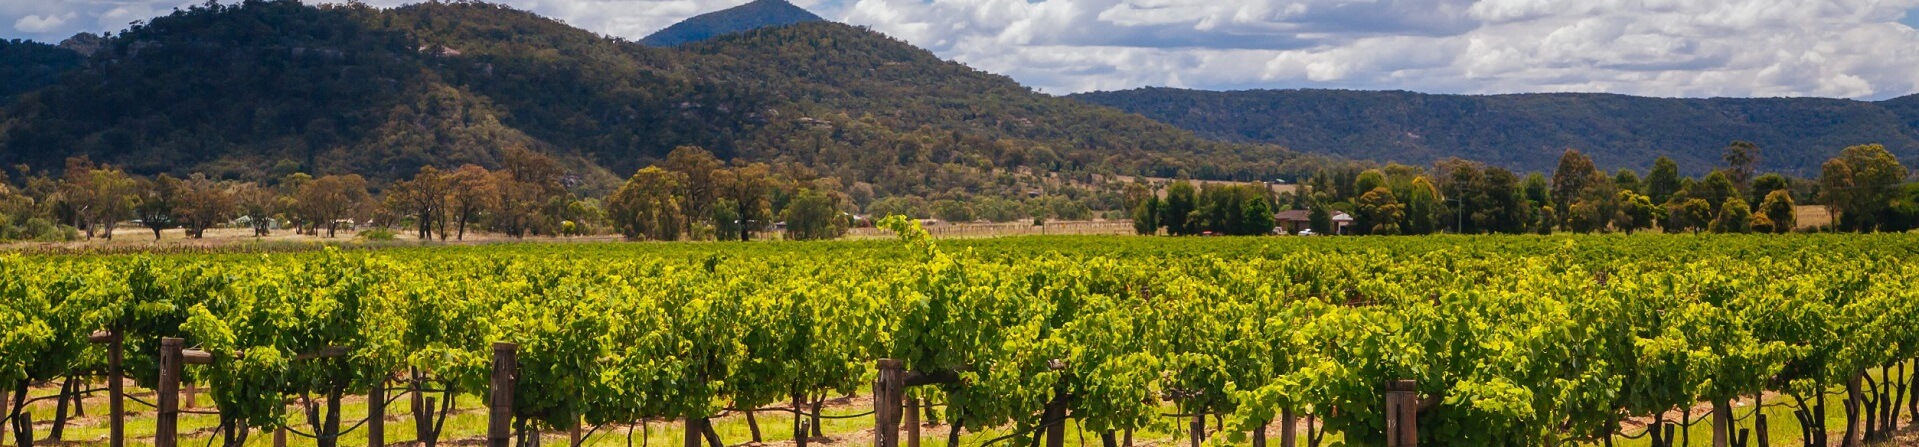 What is there to do in the Hunter Valley other than wineries?